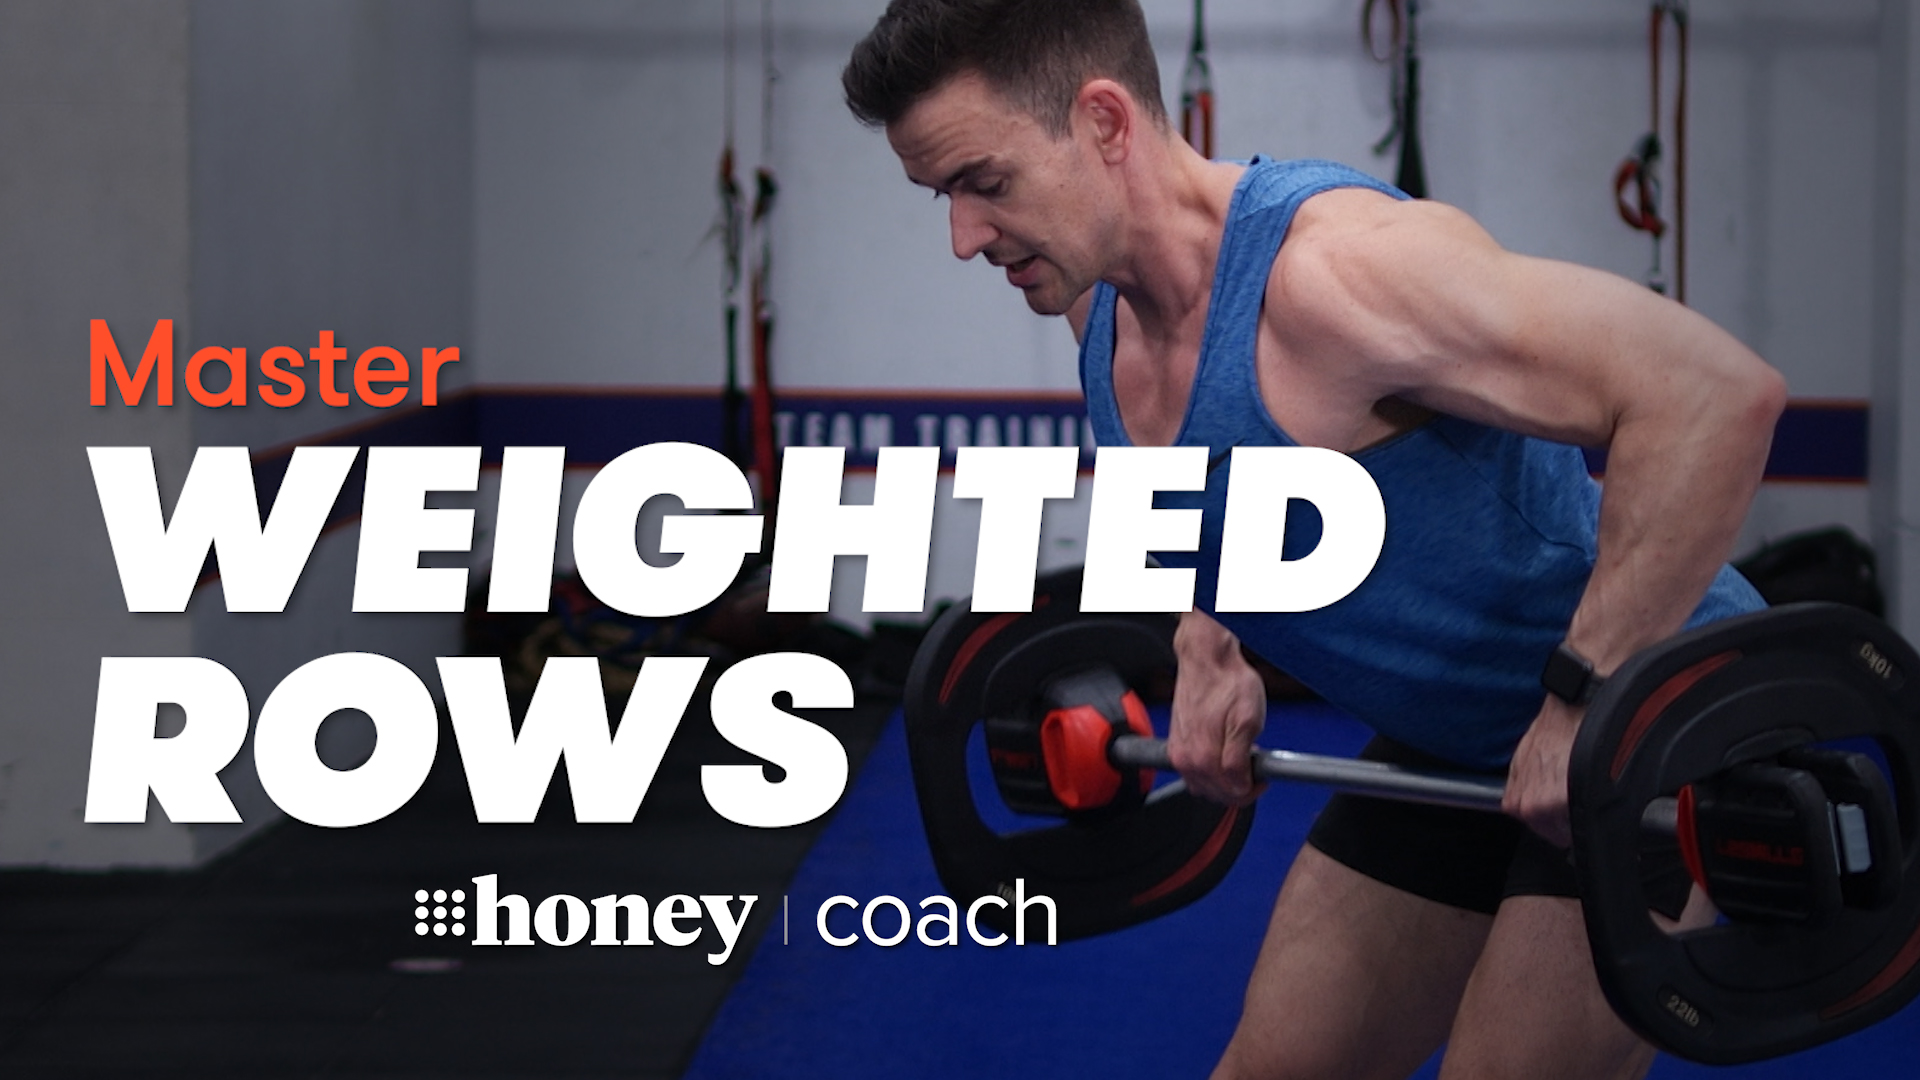 9Honey workout hacks: Weighted rows